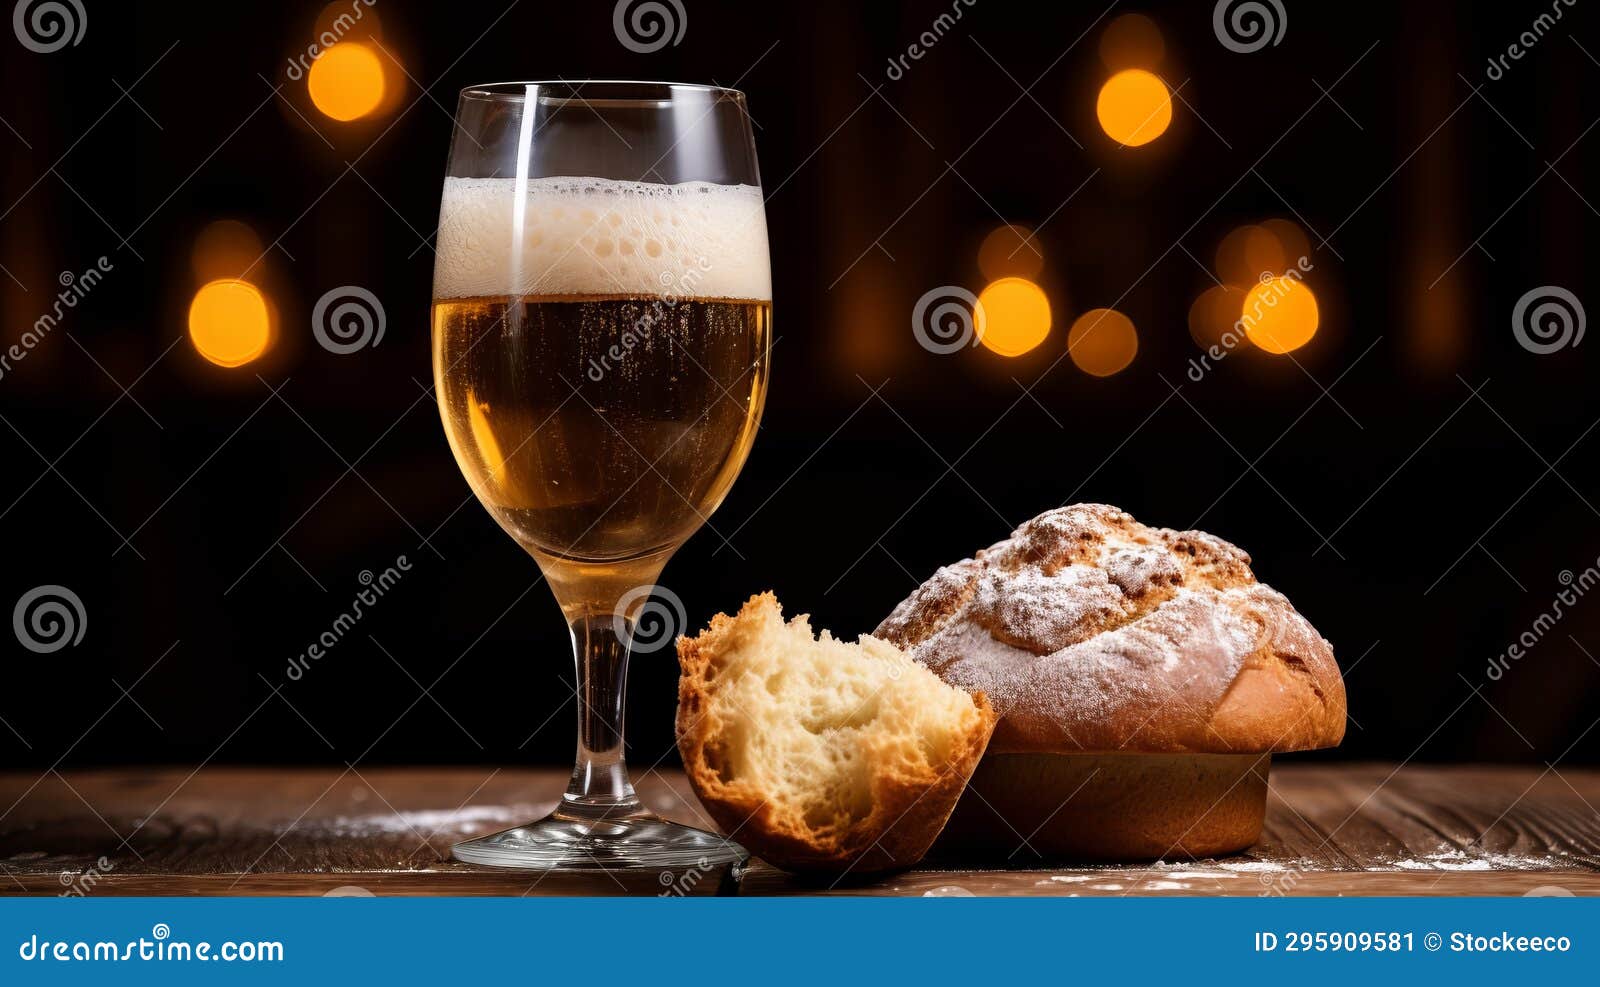 baroque chiaroscuro: a festive table setting with beer and bread